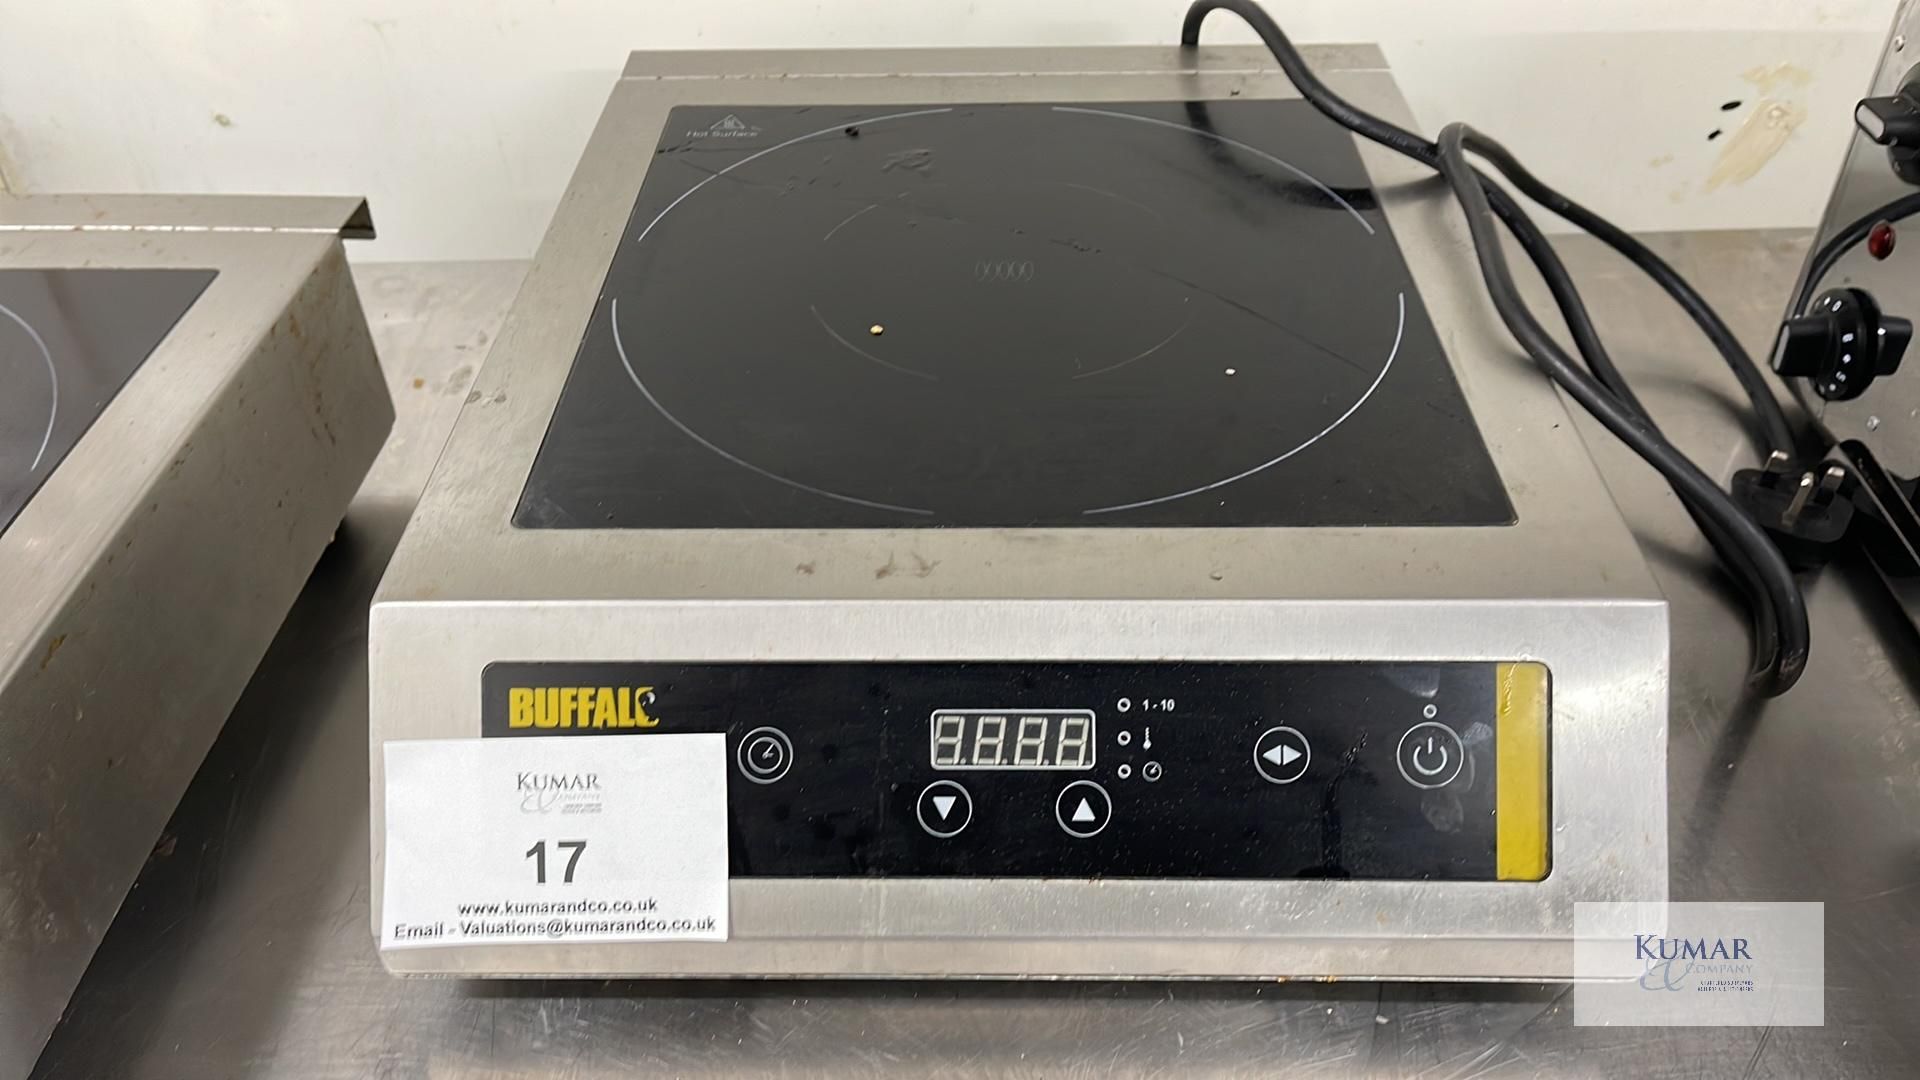 Buffalo CP 799 Heavy Duty 3KW Induction Hob, Serial No. 2017070500219 - New Cost Â£300 + VAT - Image 3 of 4